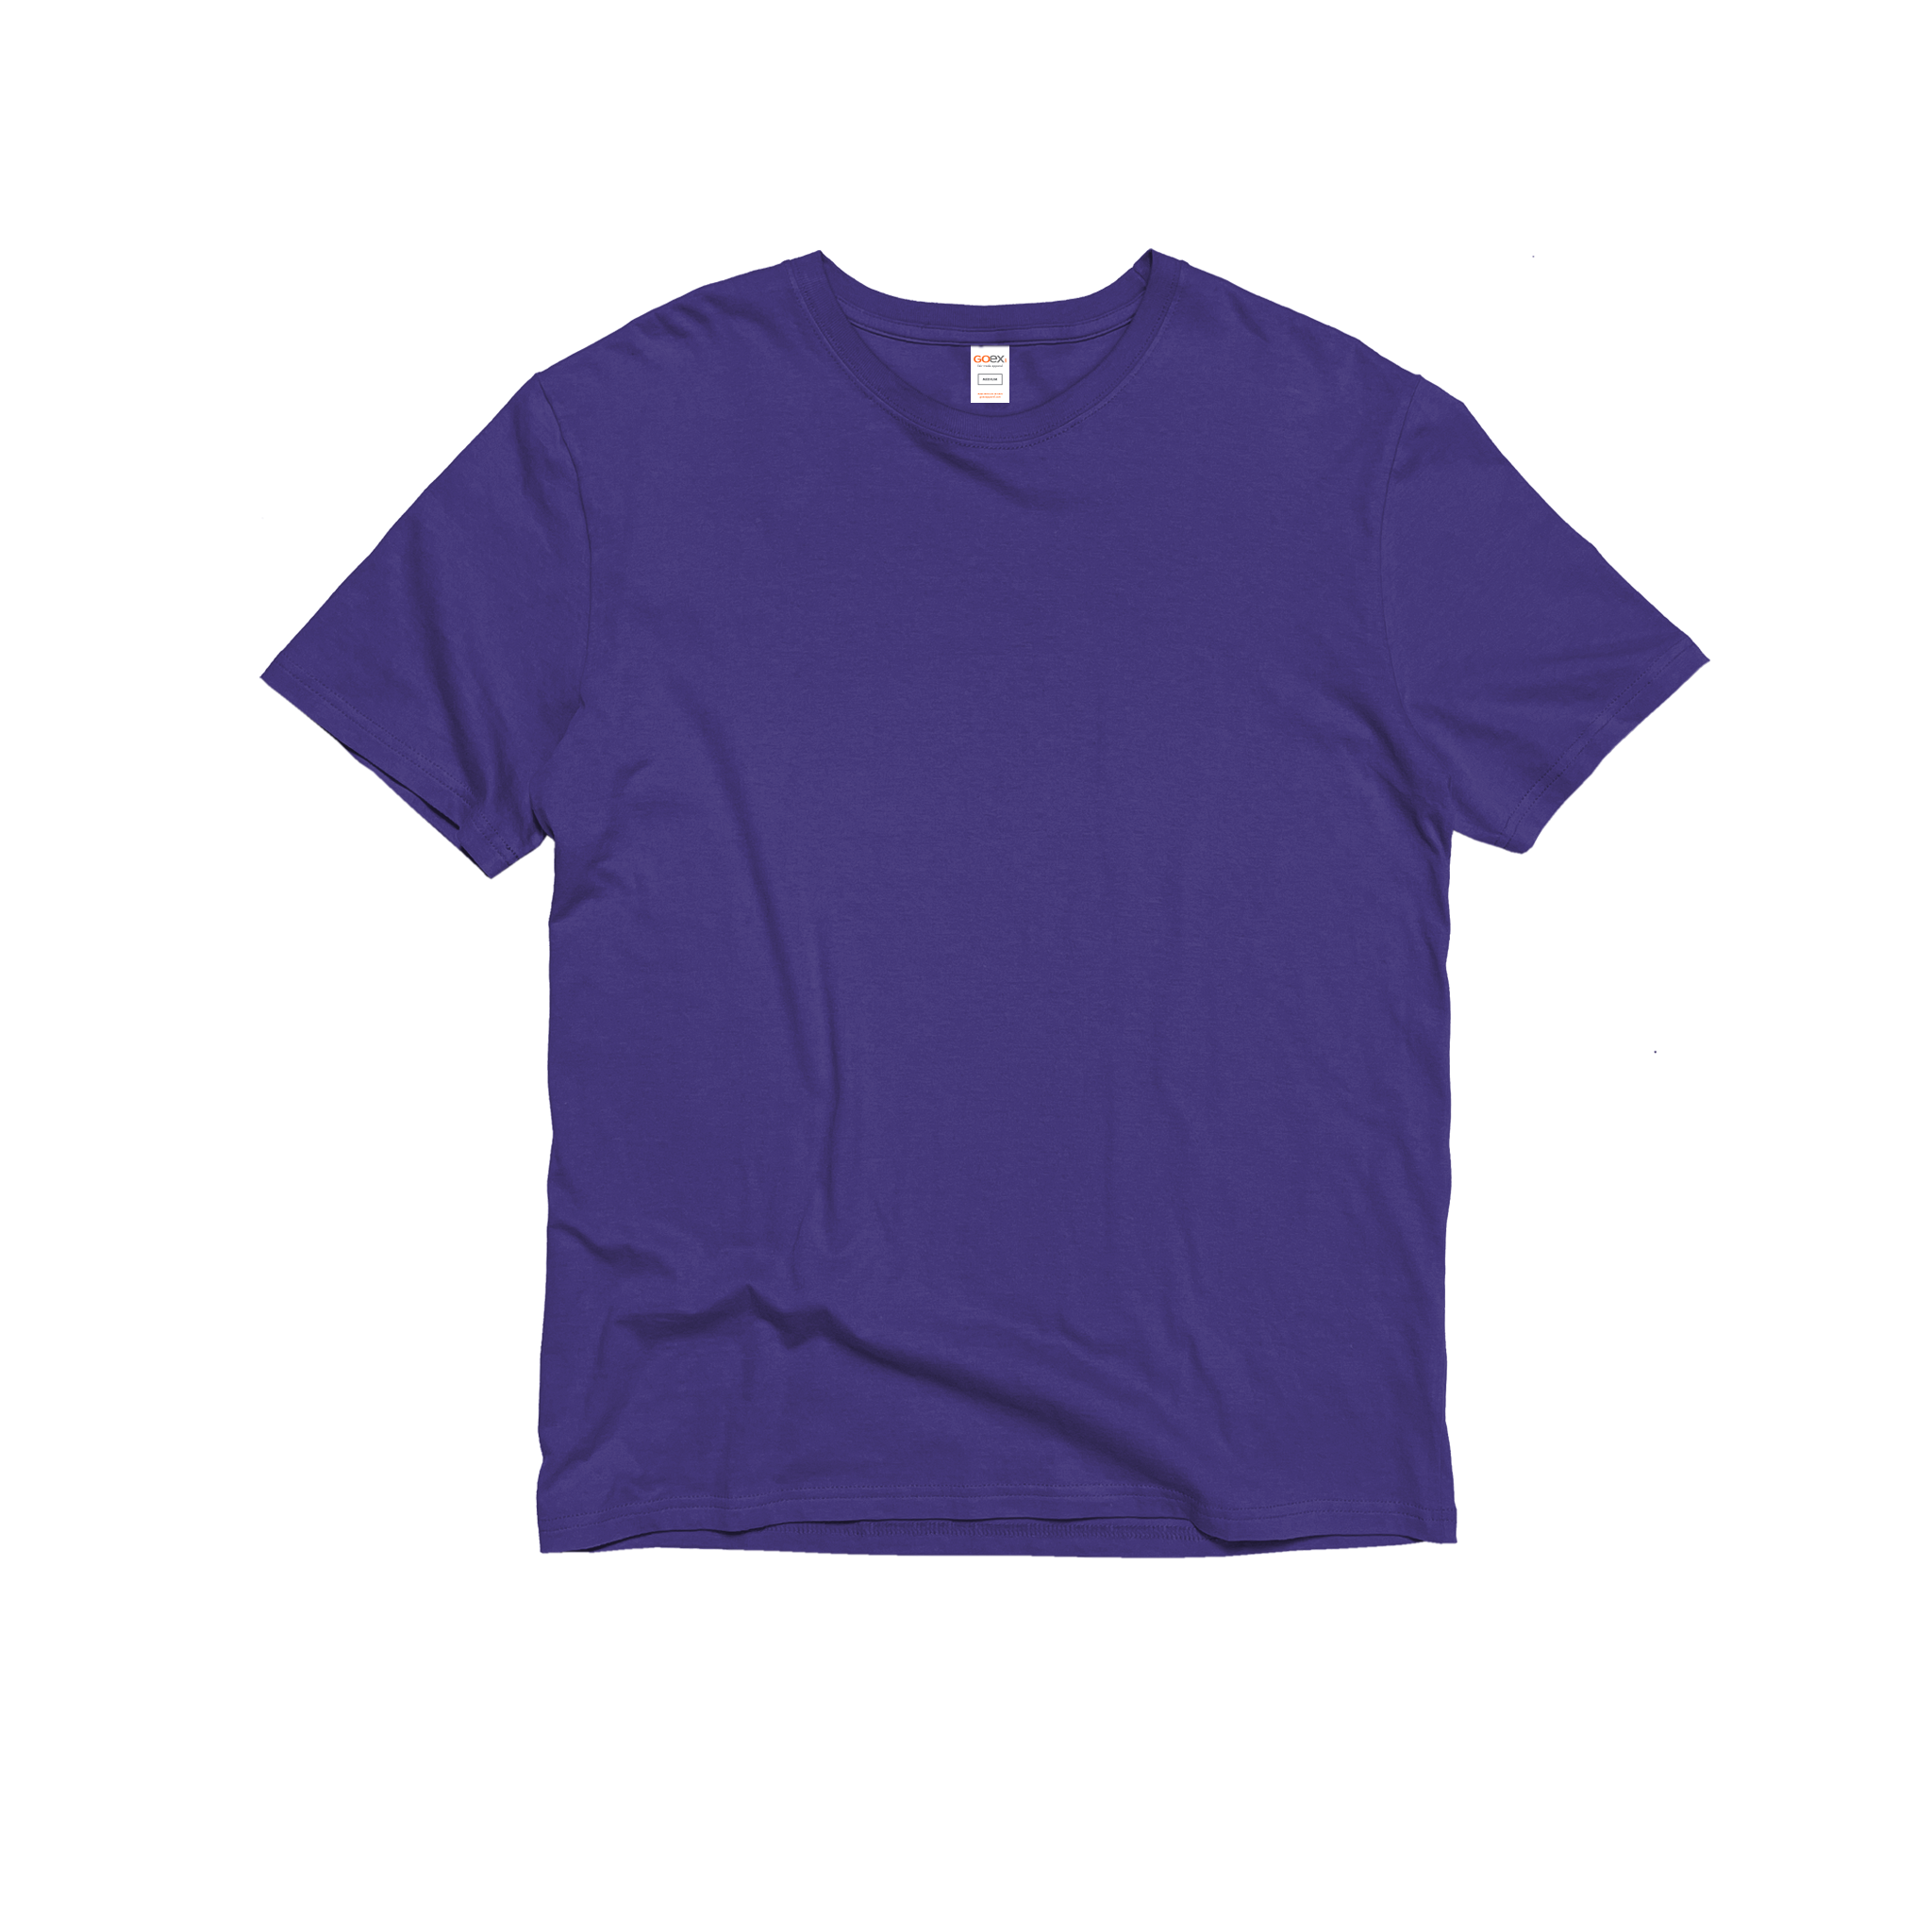 Front Flat Lay of GOEX Unisex and Men's Cotton Tee in Purple